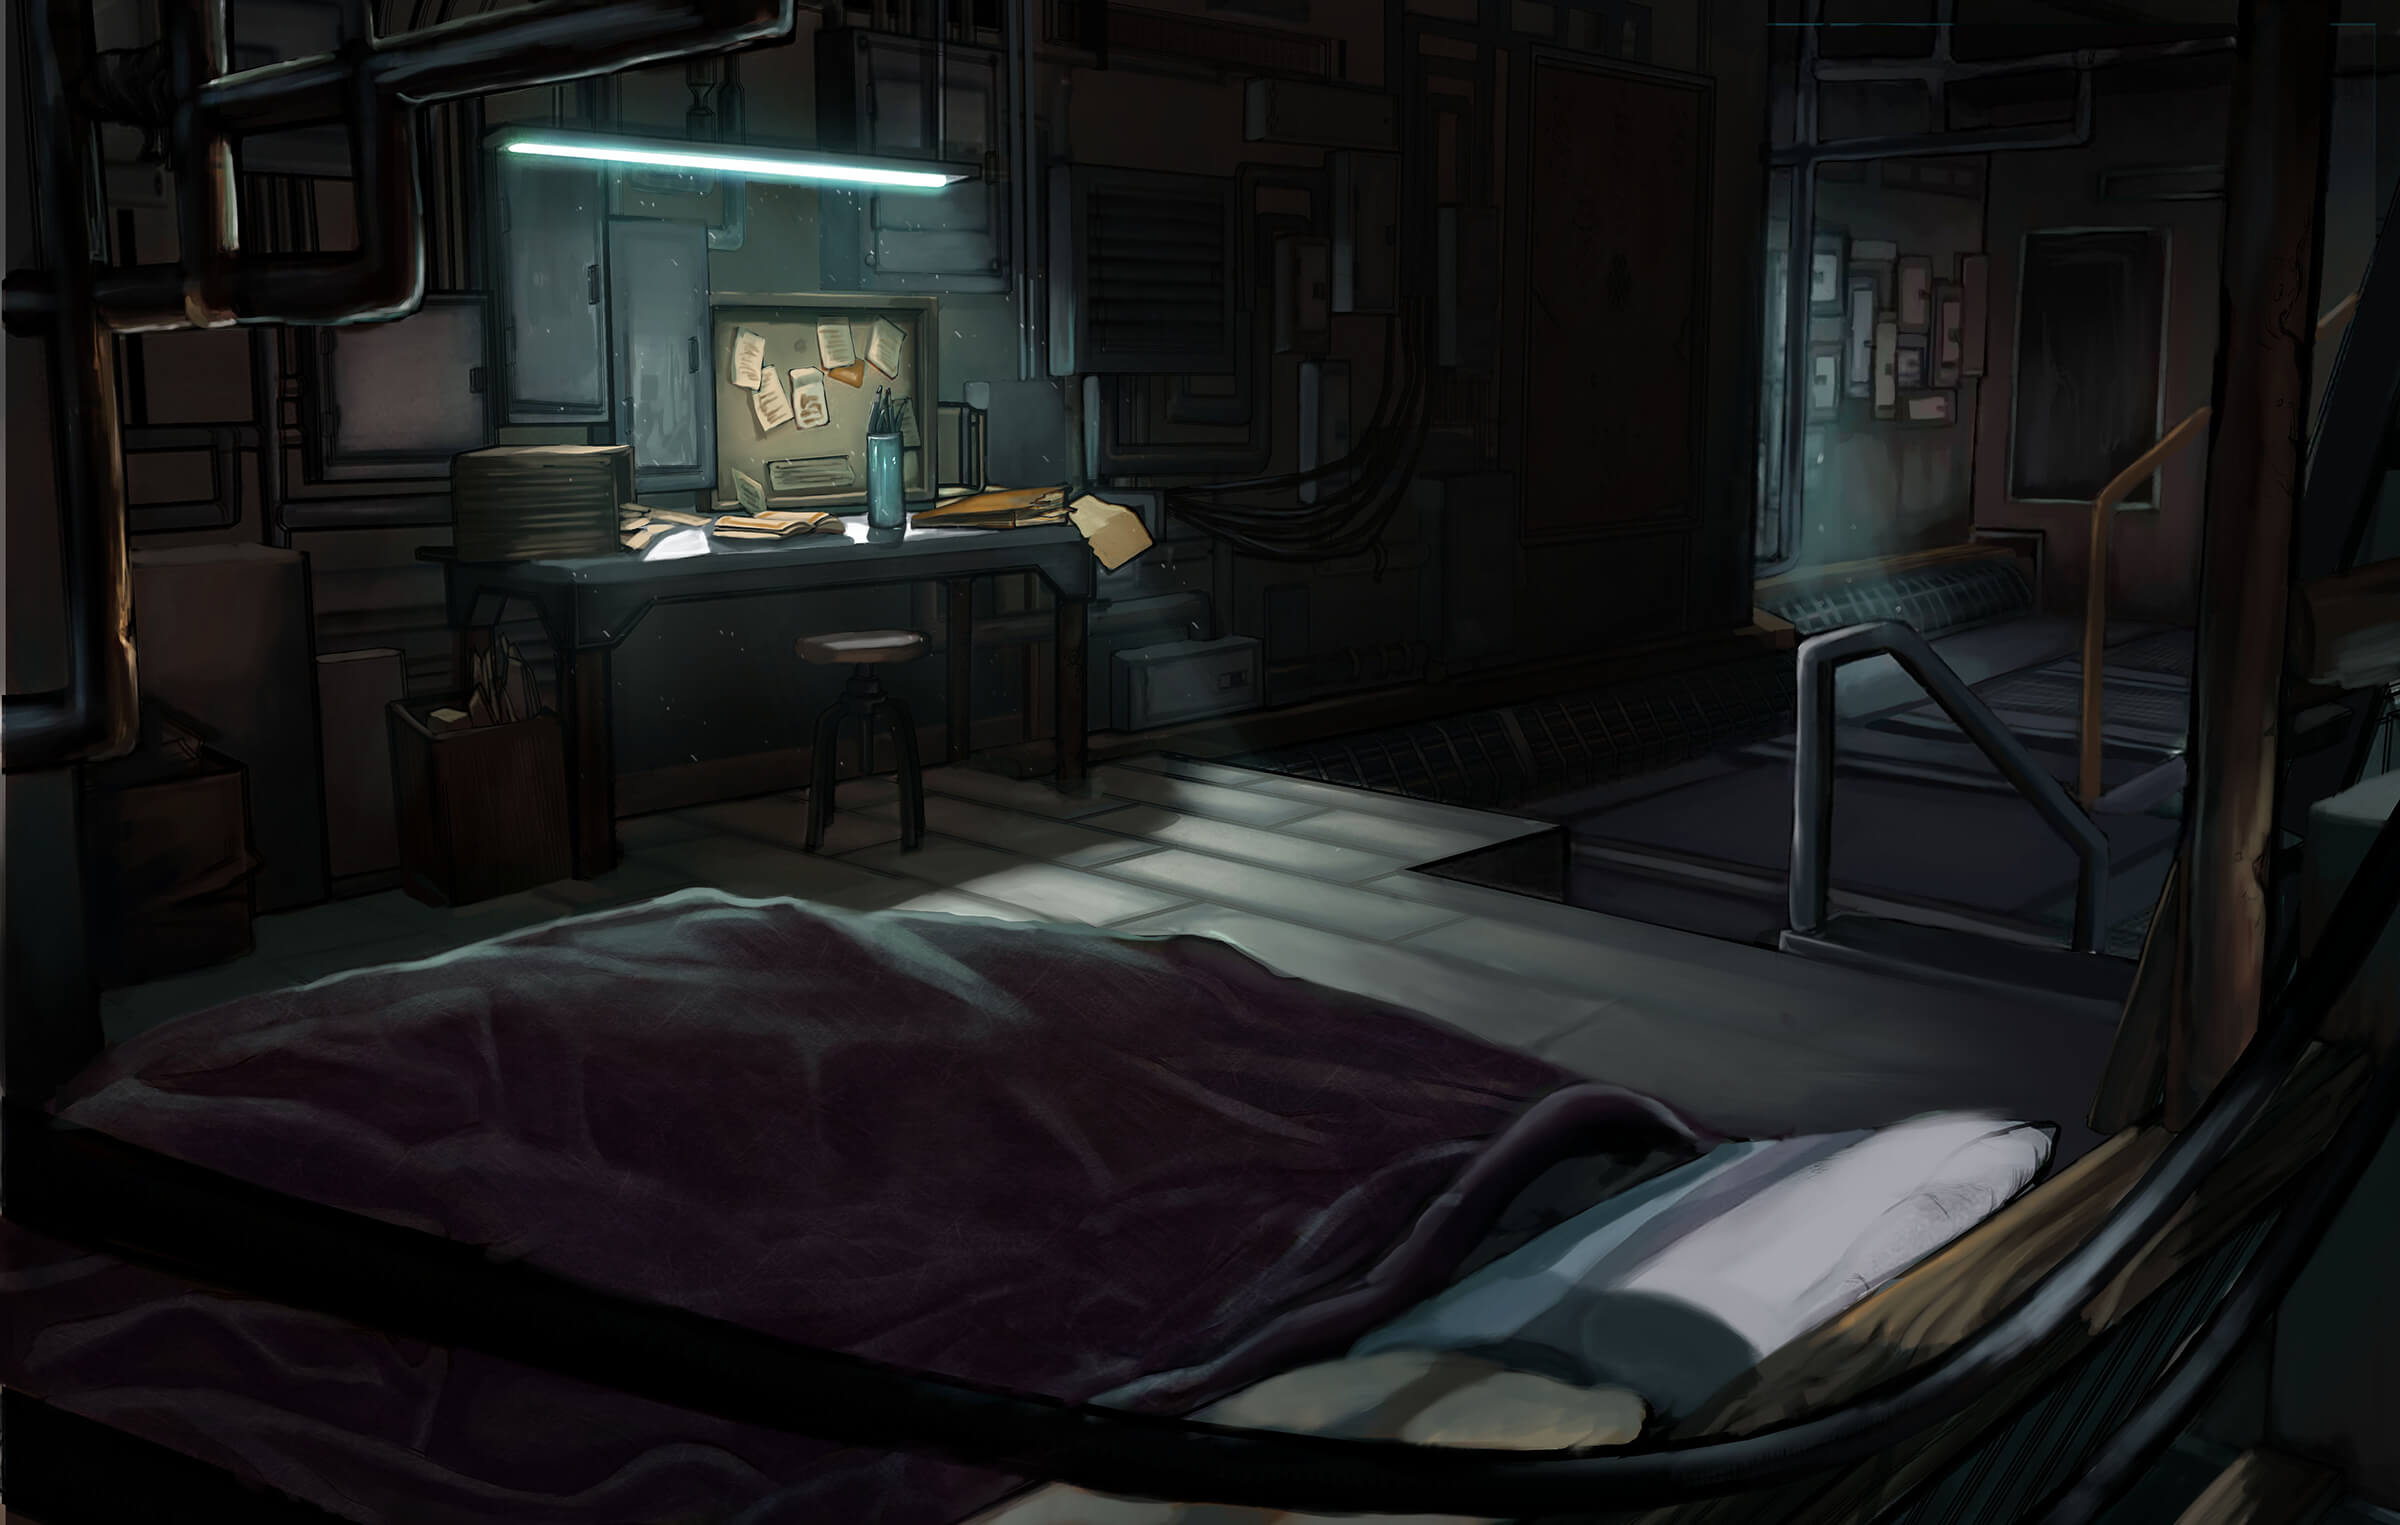 digital painting of a bed and desk in a dark, industrial-type setting